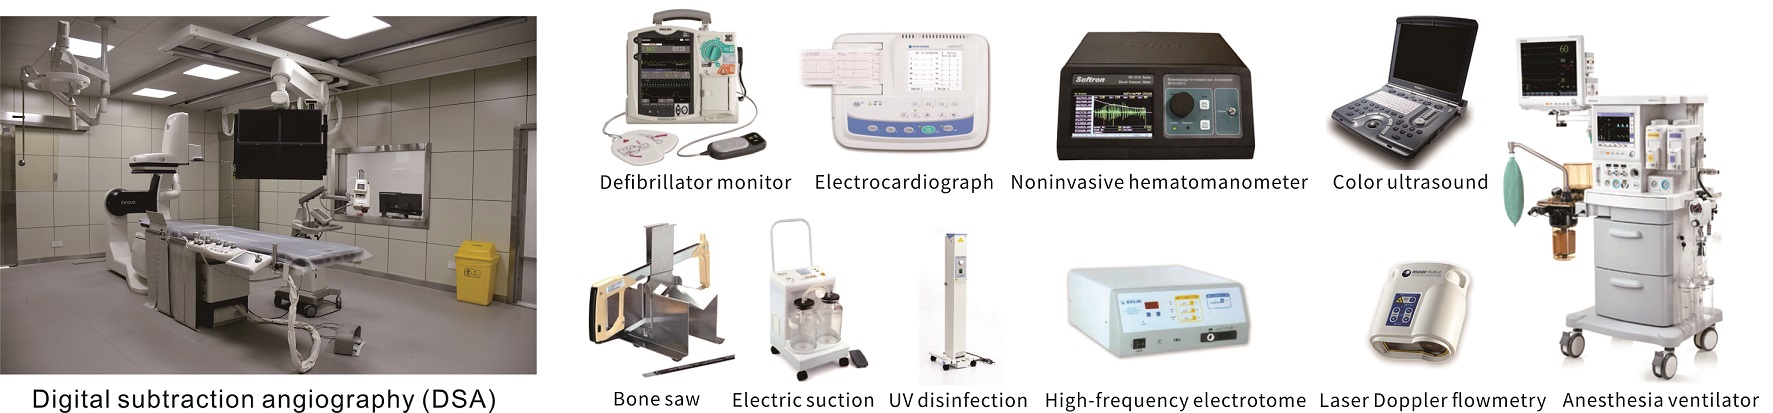 Equipment and devices for animal surgery at Greentech Bioscience.png